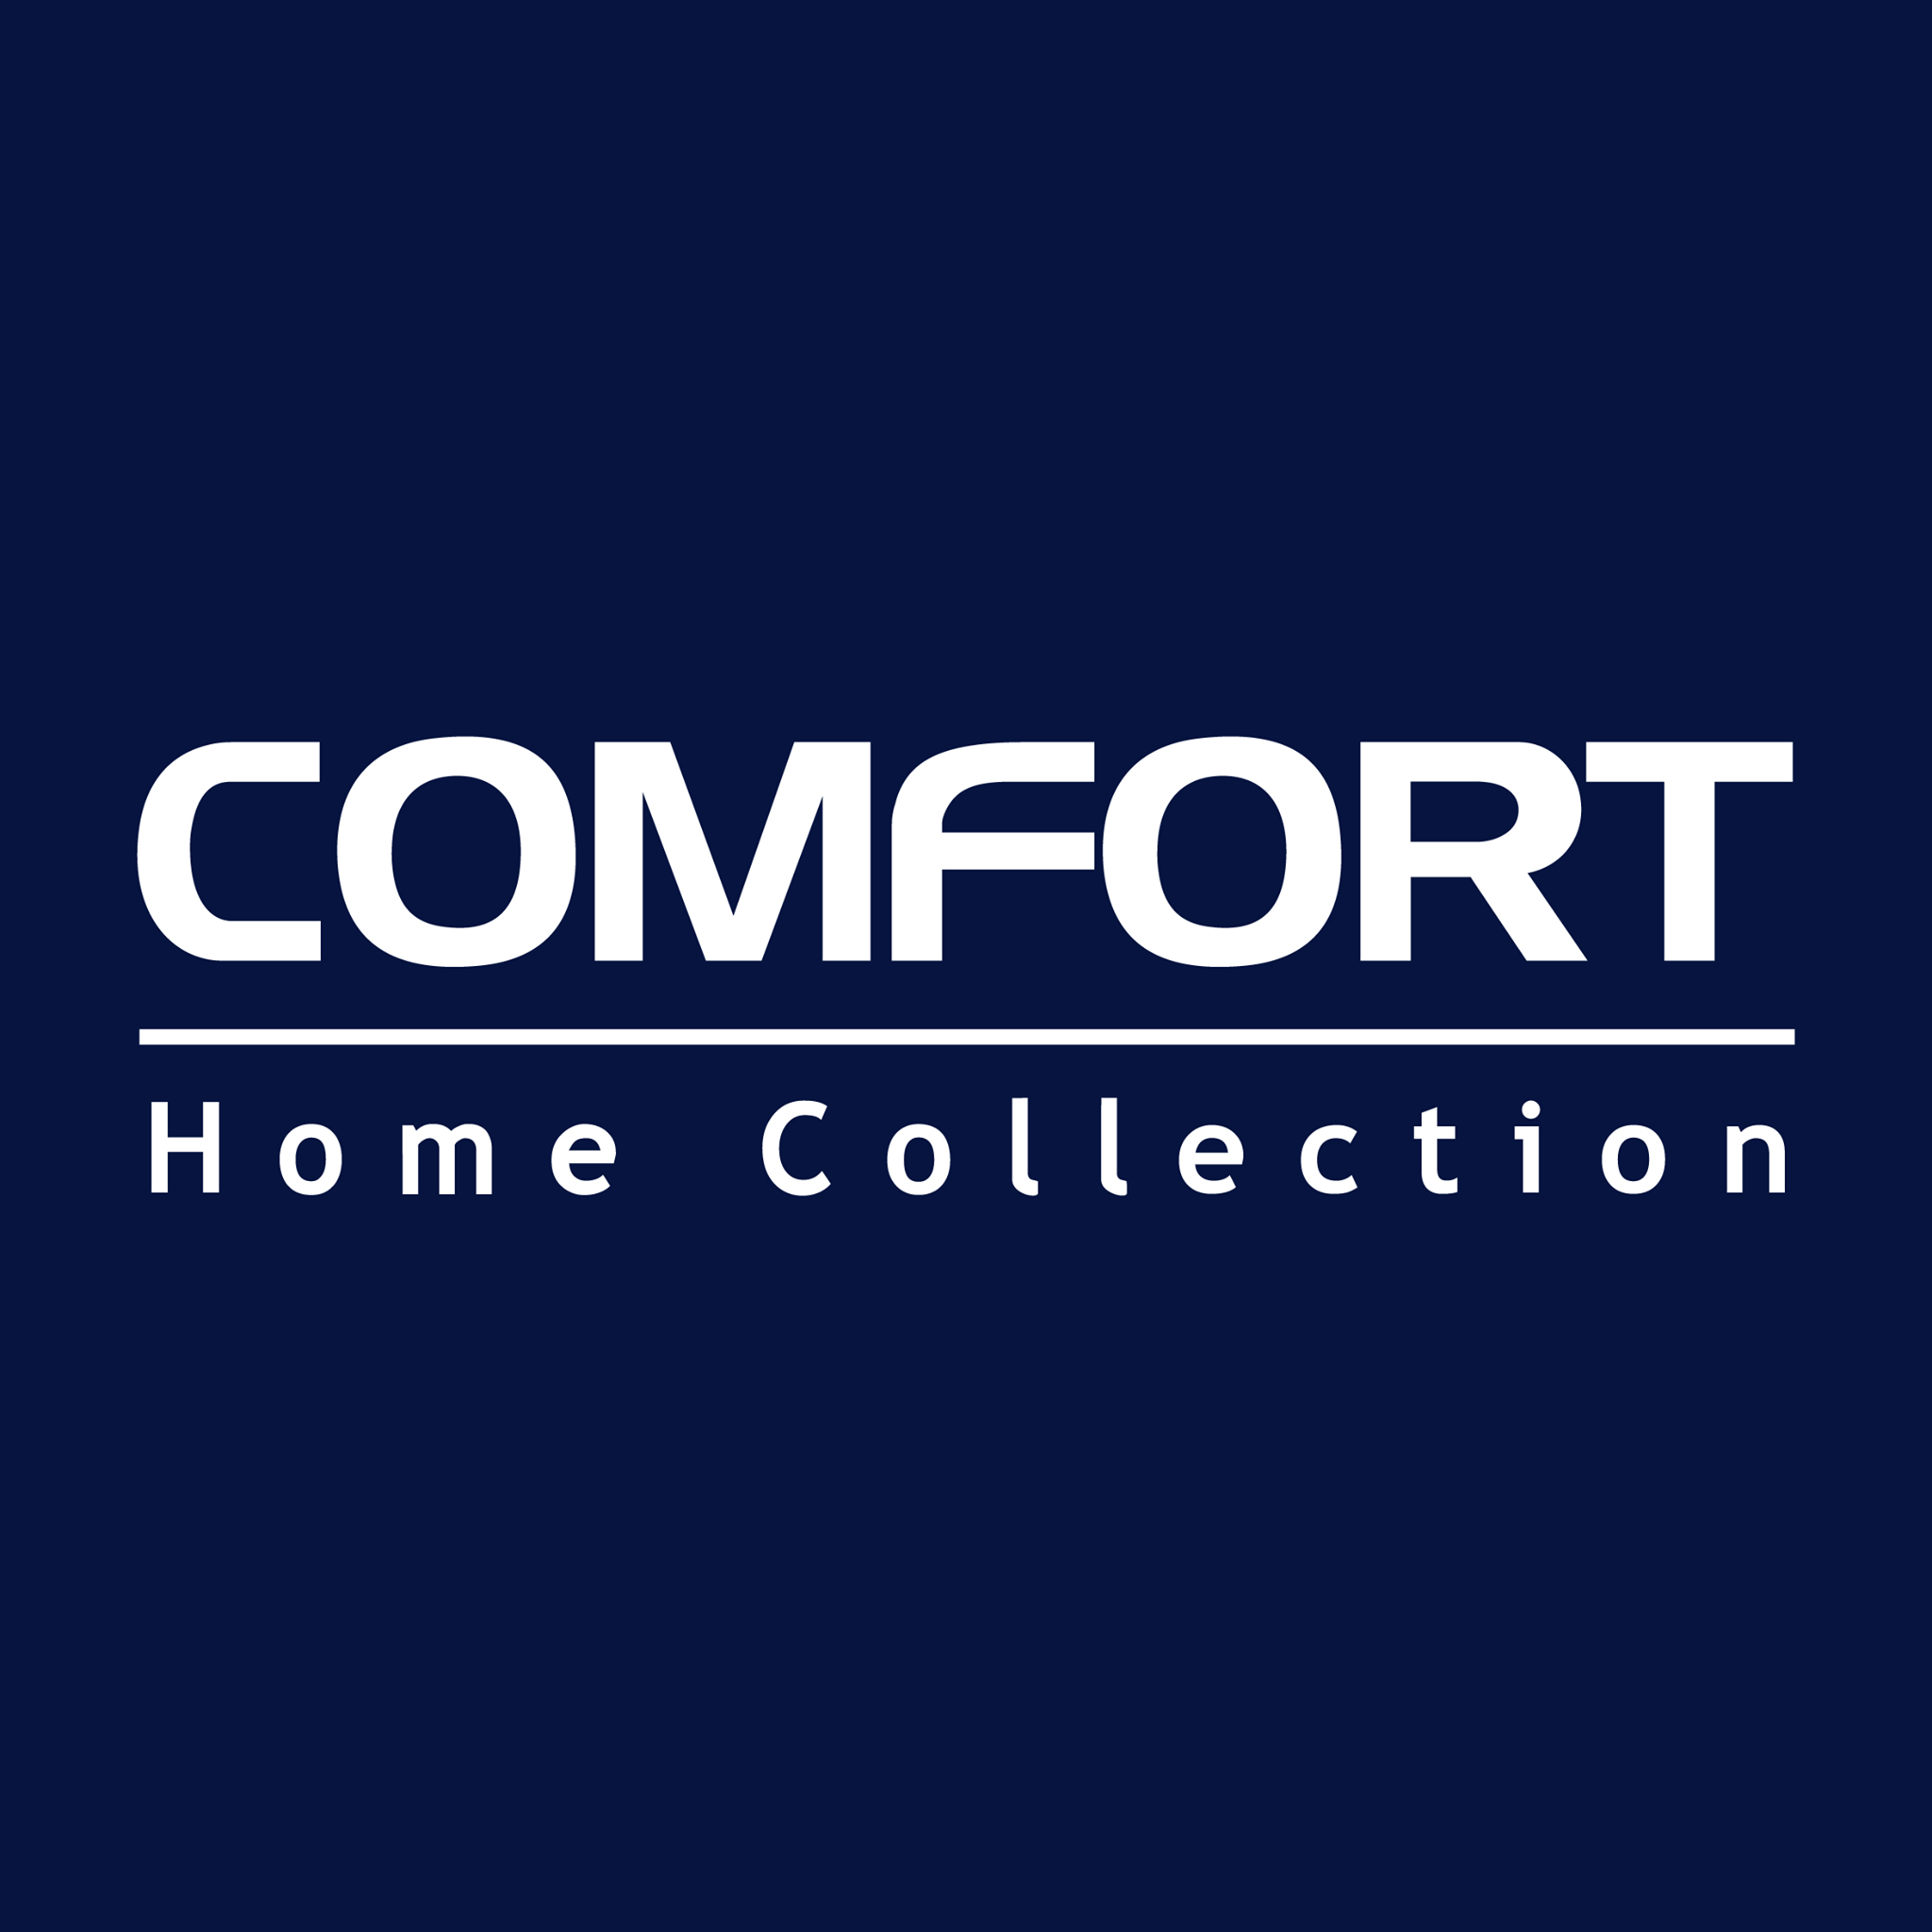 Comfort Home Collection